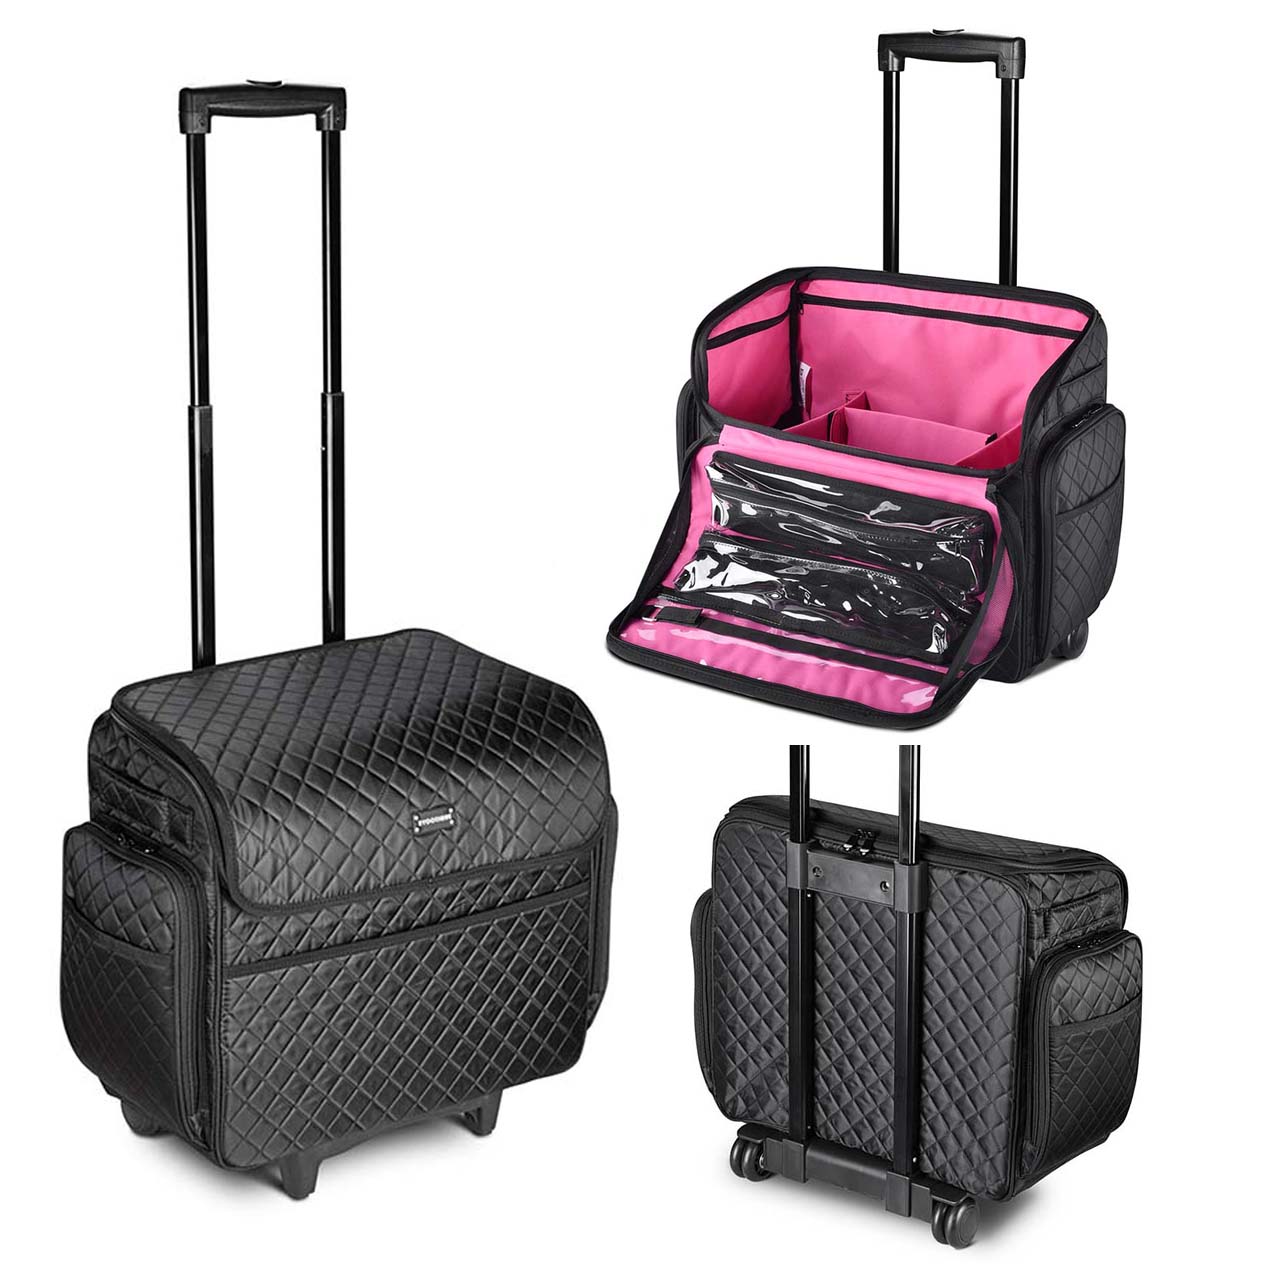 Byootique Rolling Hair Stylist Makeup Artist Hobby Case